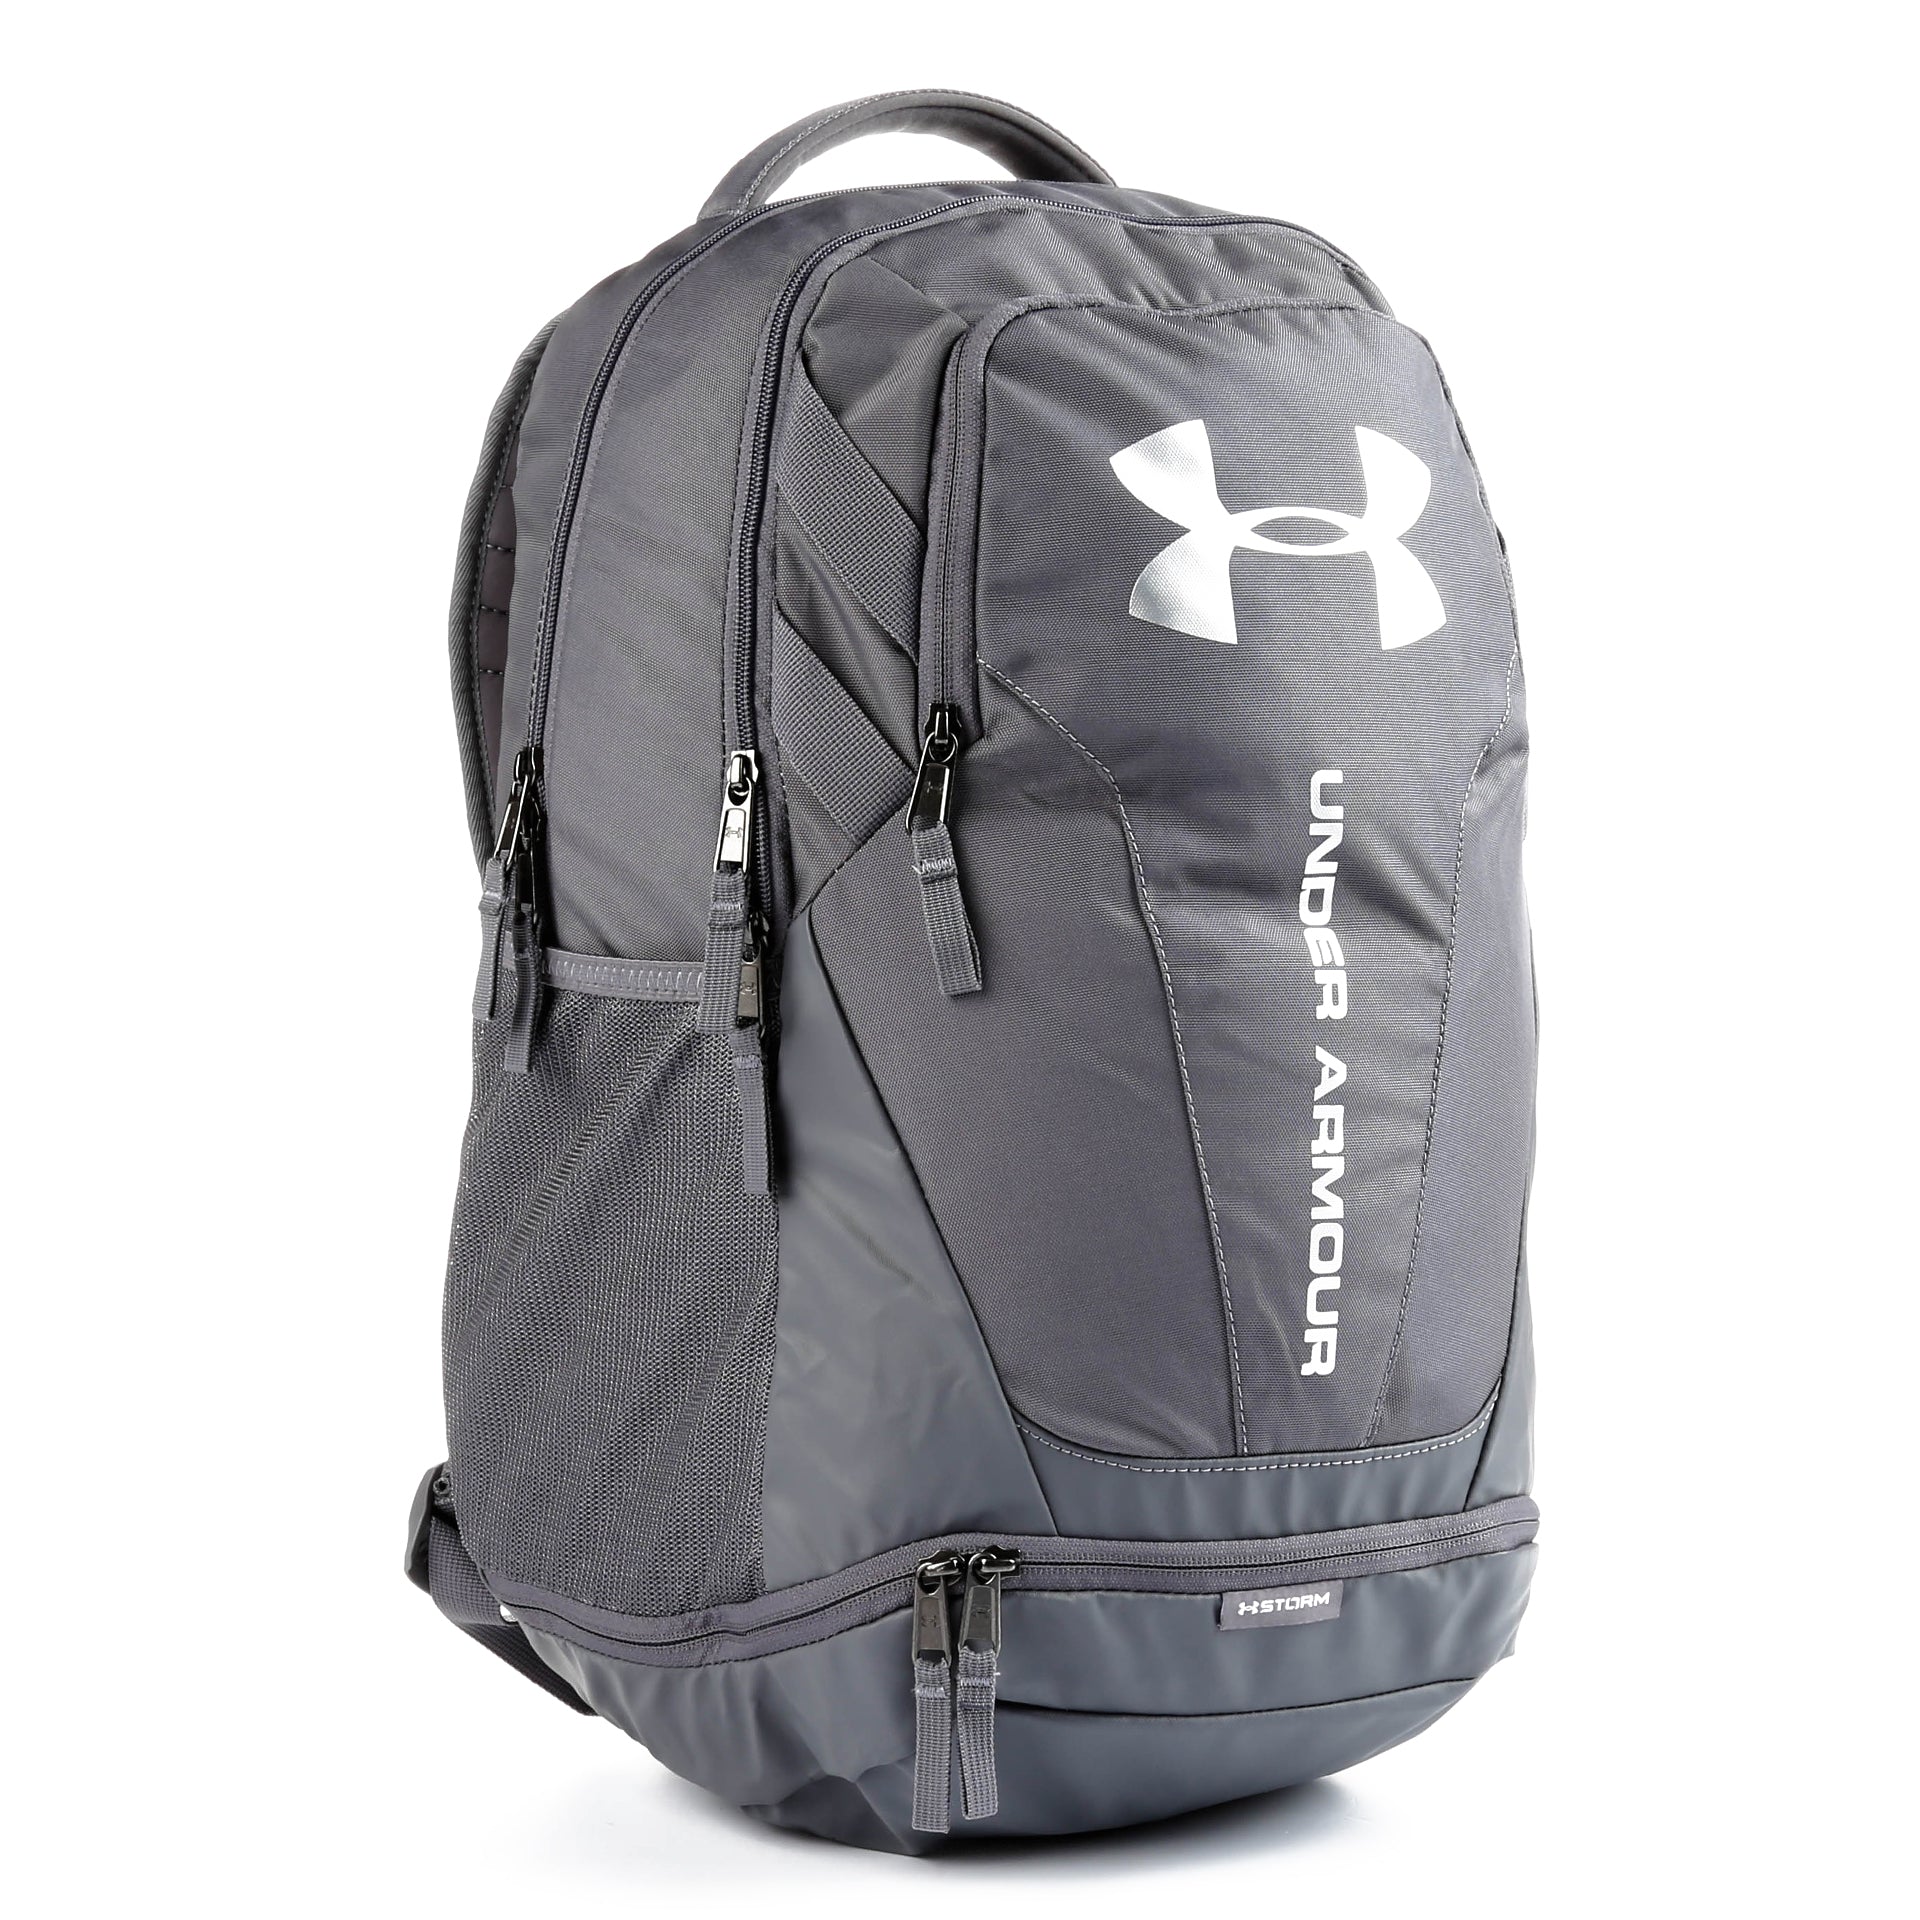 Under Armour Hustle 3.0 Backpack Review